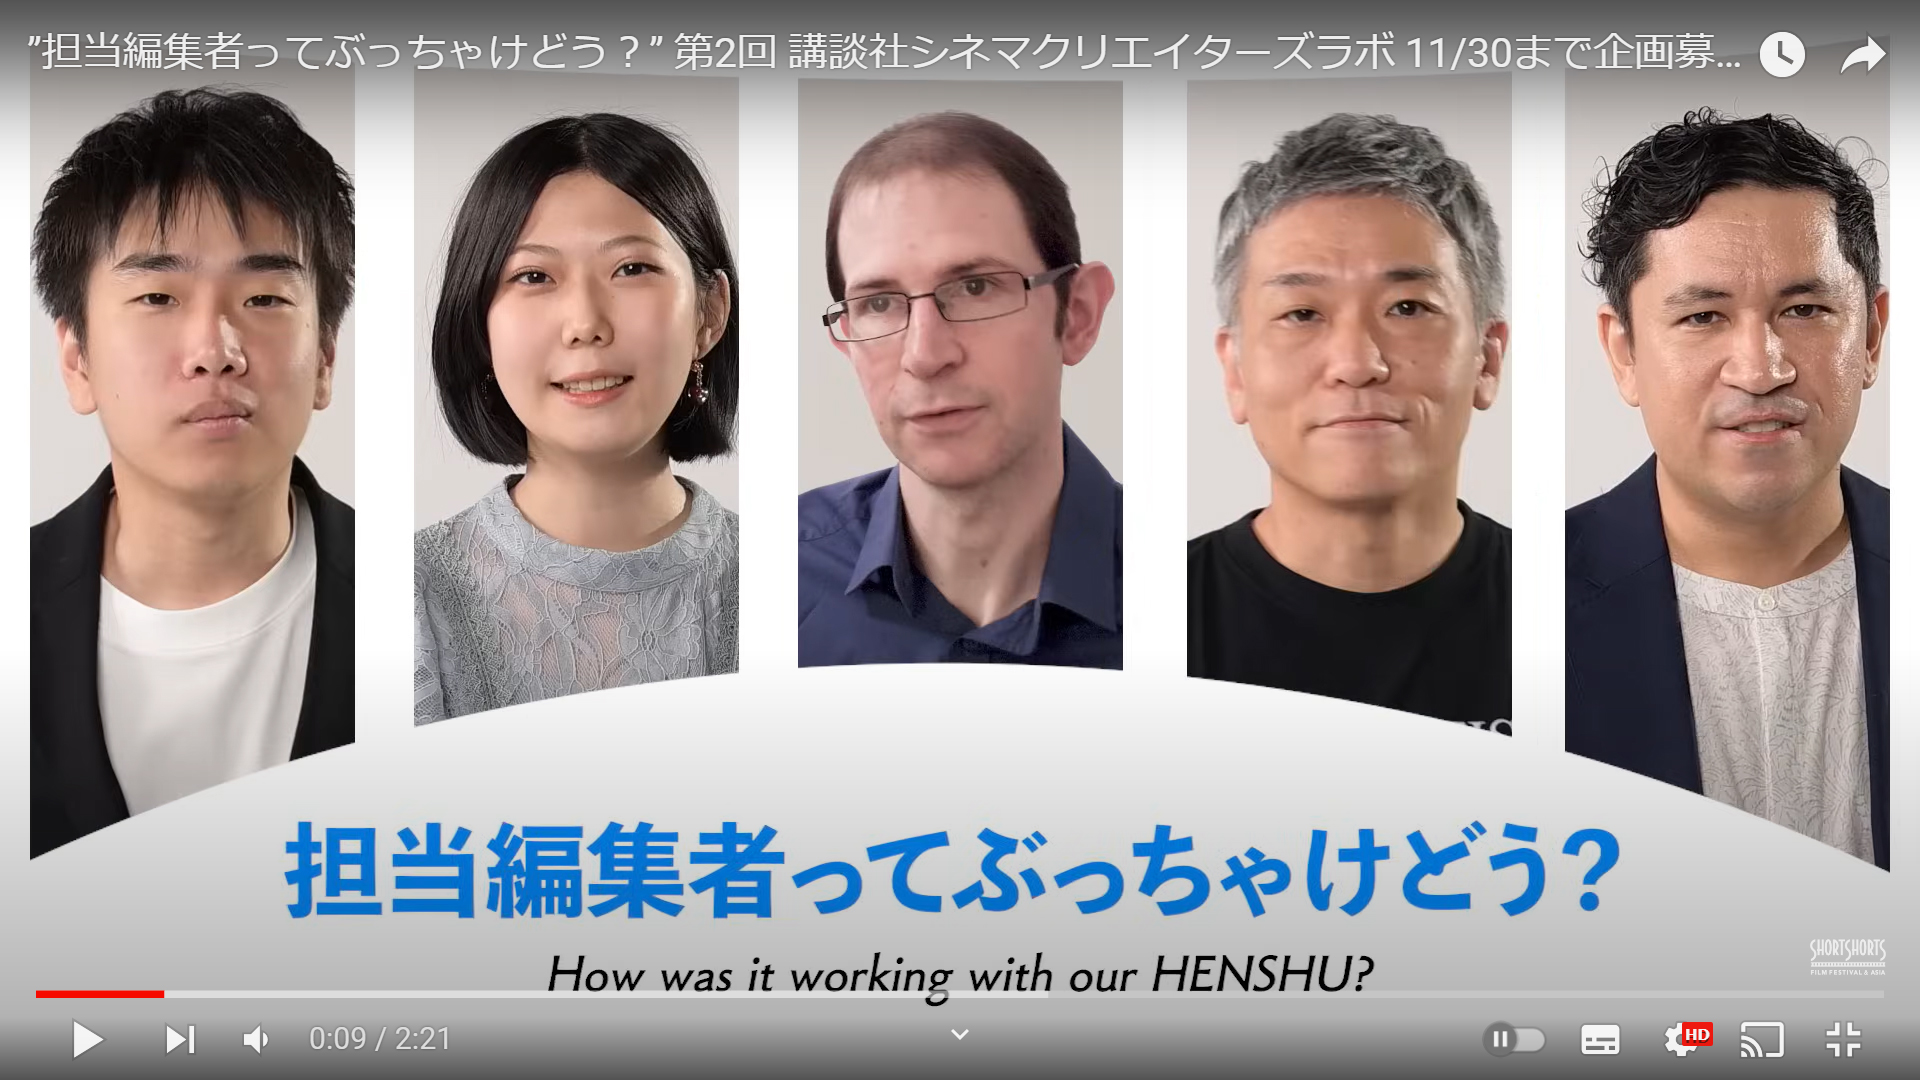 How was it working with our HENSHU?